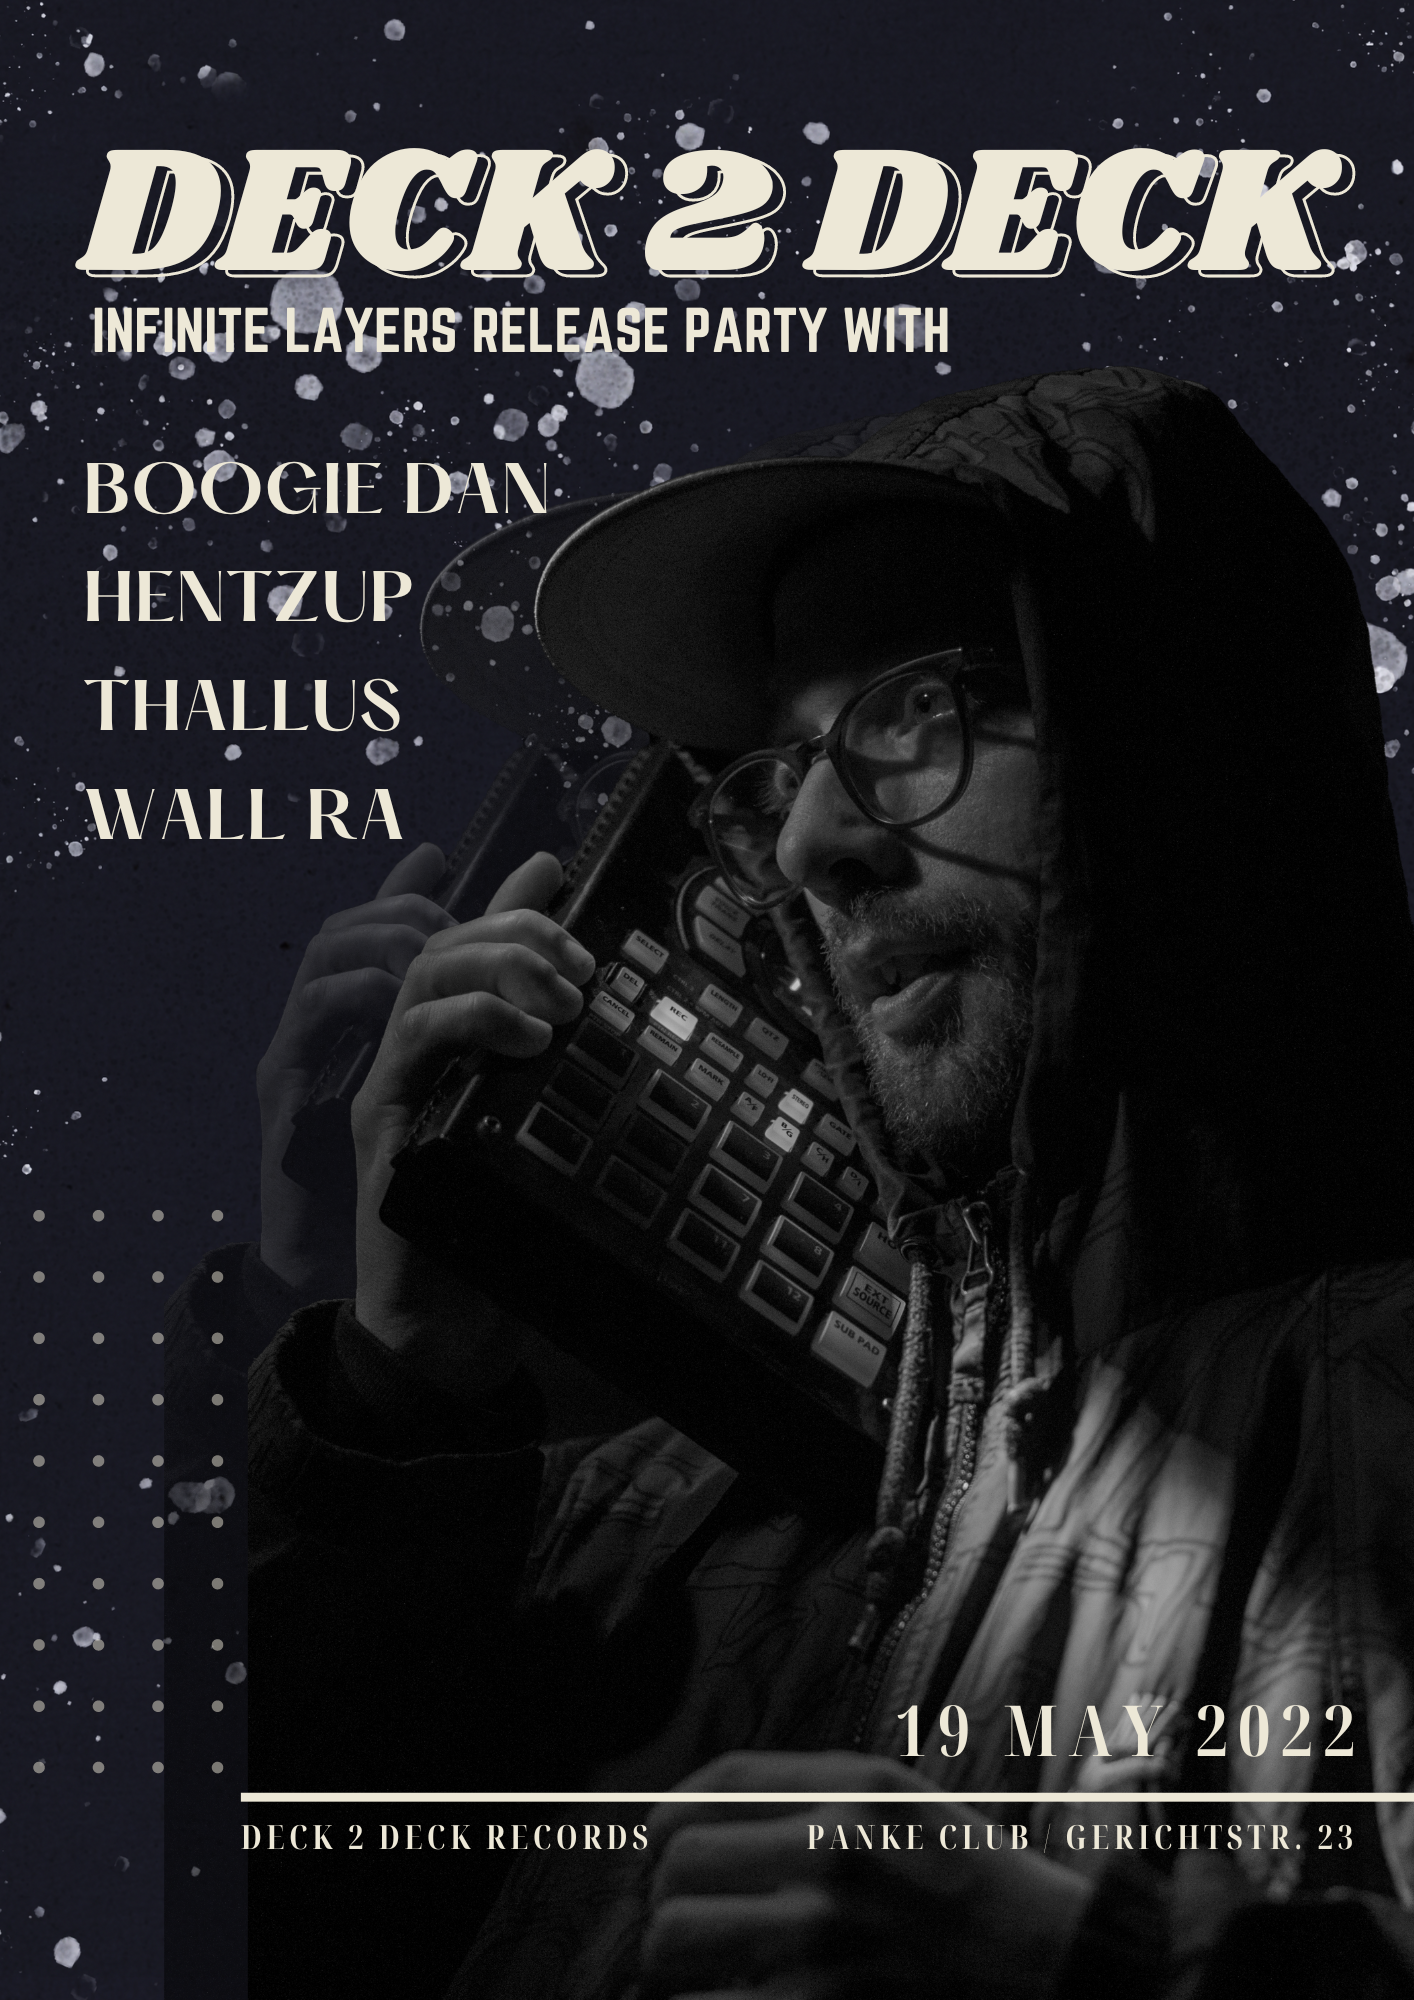 Deck 2 Deck // Infinite Layers Release Party - フライヤー表